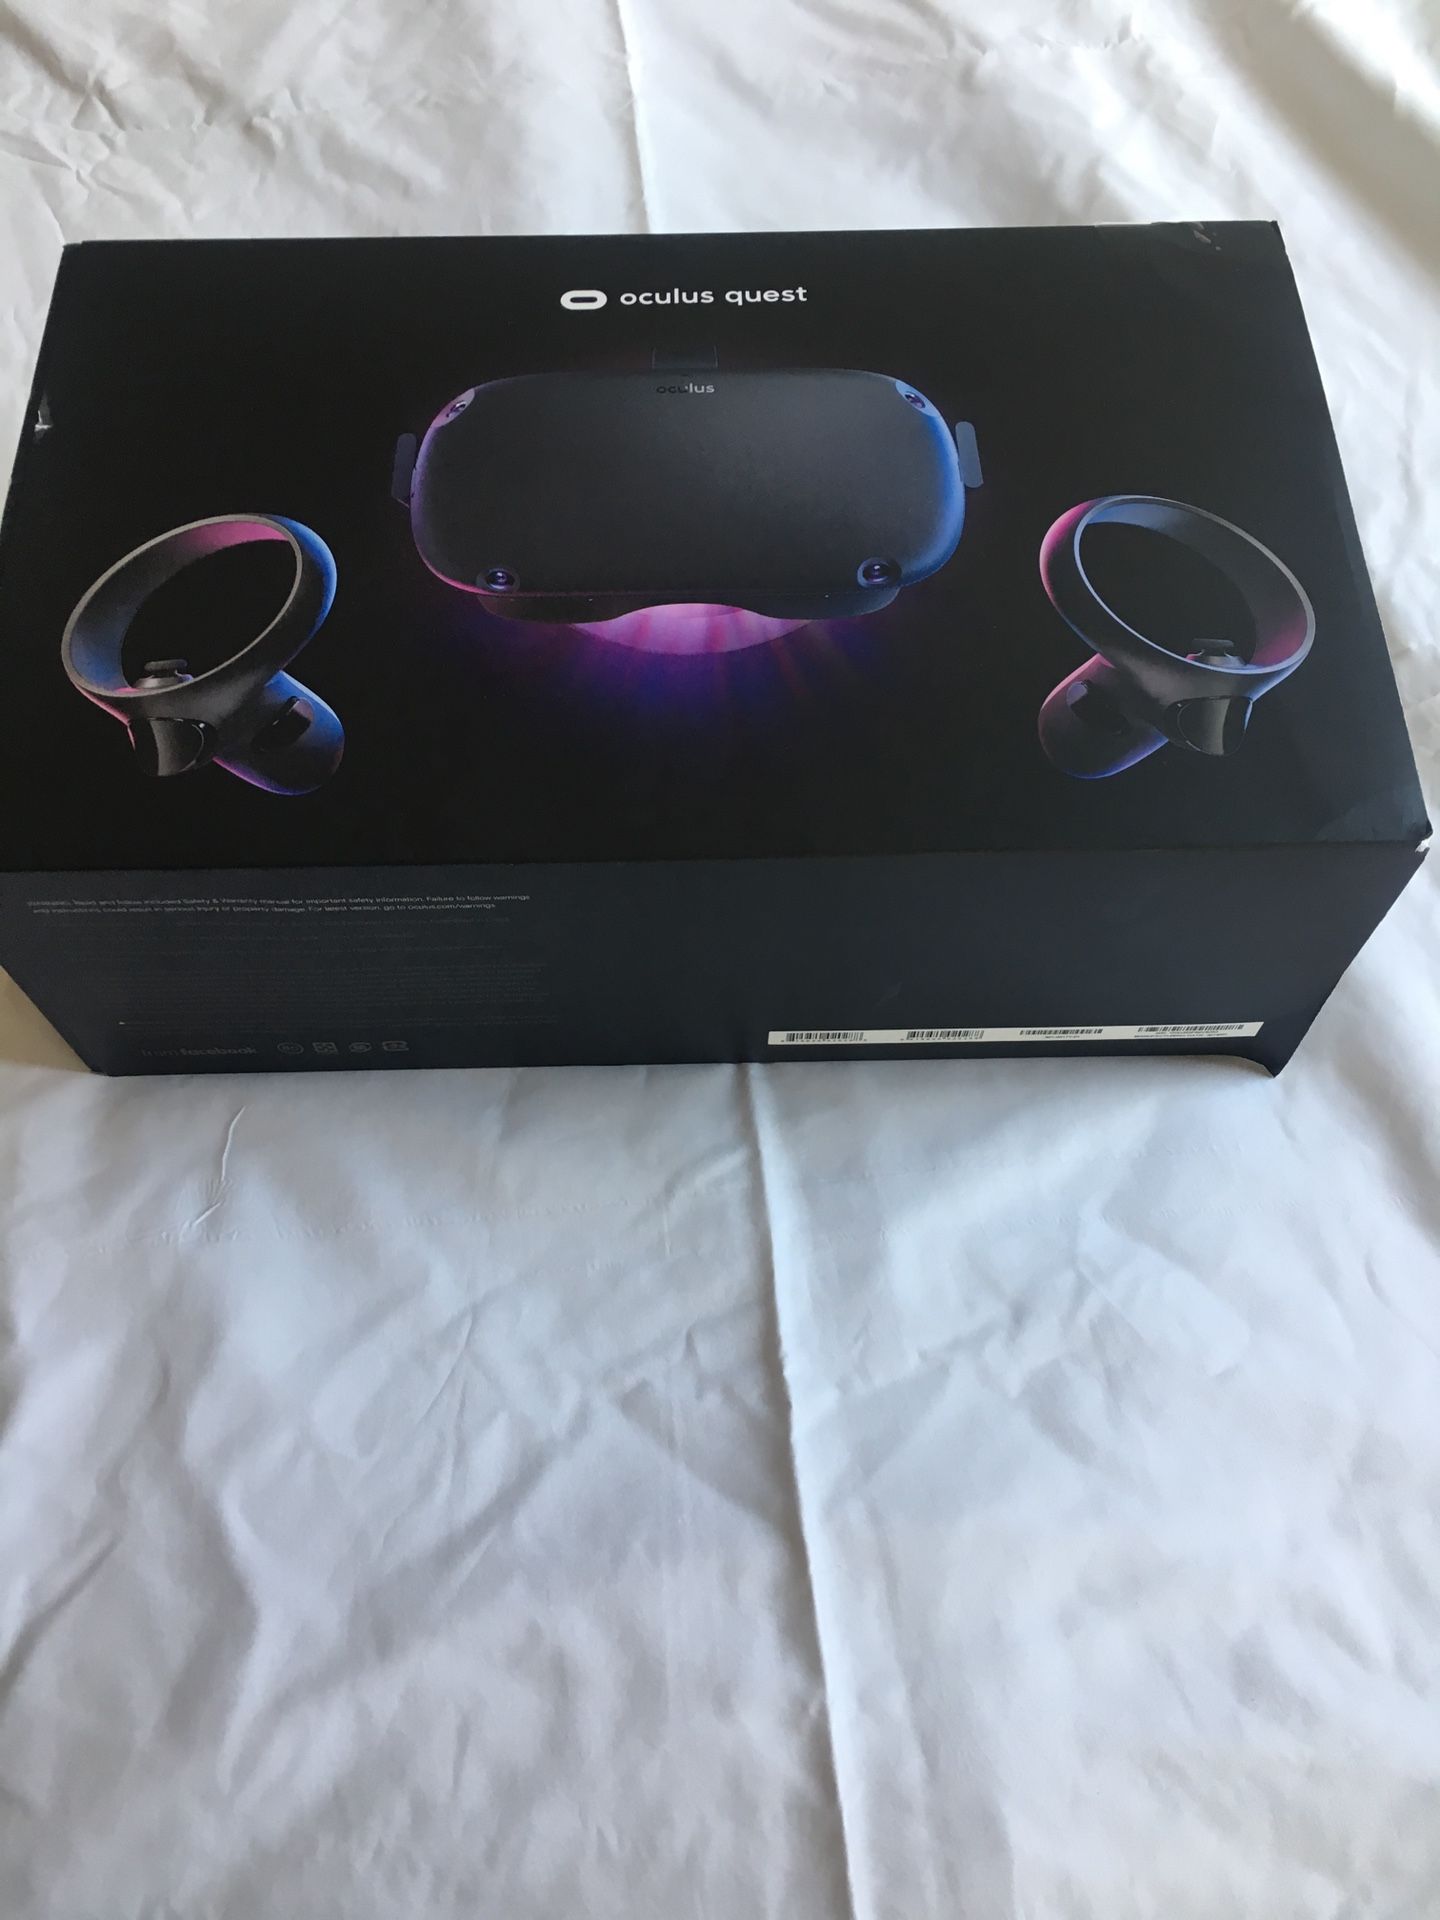 Oculus Quest All-in-One VR Gaming Headset - 128GB